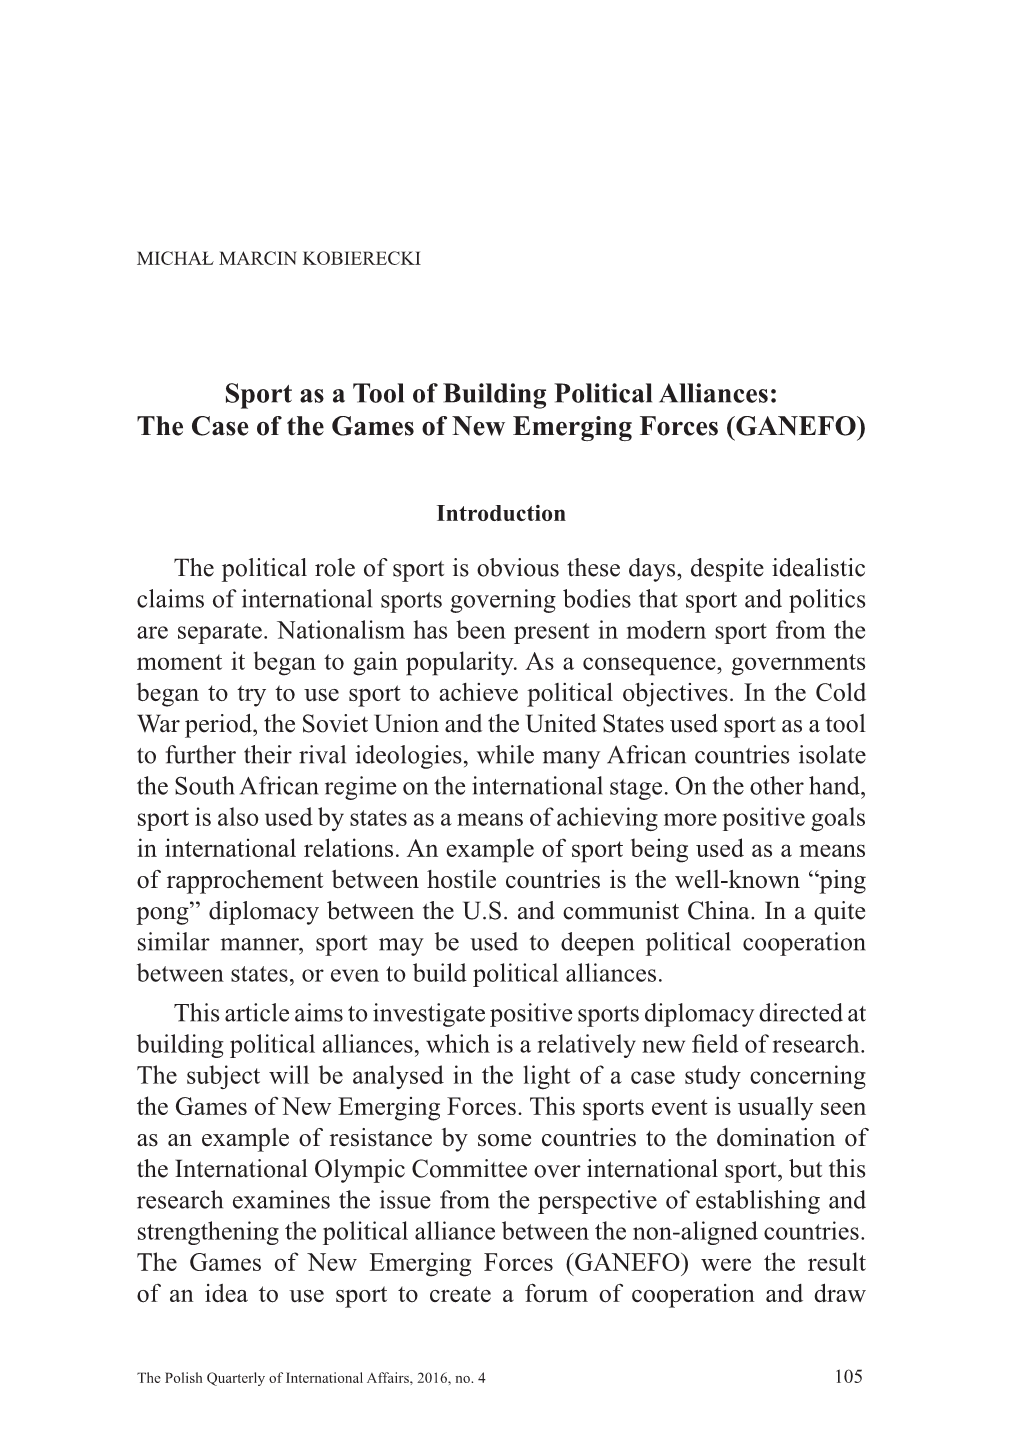 Sport As a Tool of Building Political Alliances: the Case of the Games of New Emerging Forces (GANEFO)